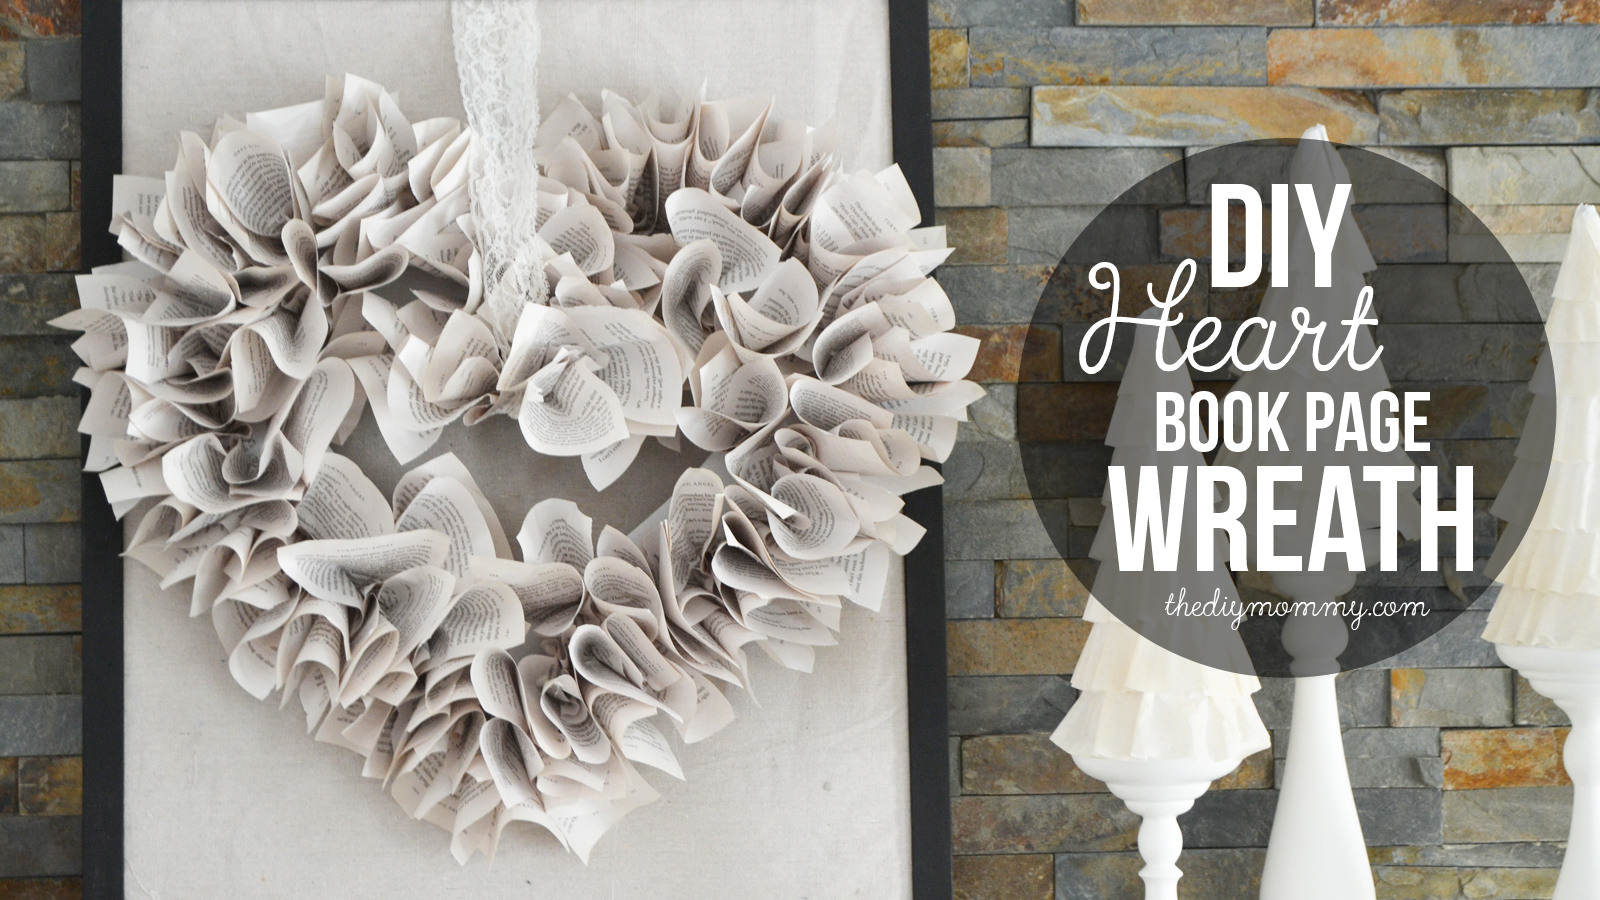 Video tutorial: How to make a heart book page wreath